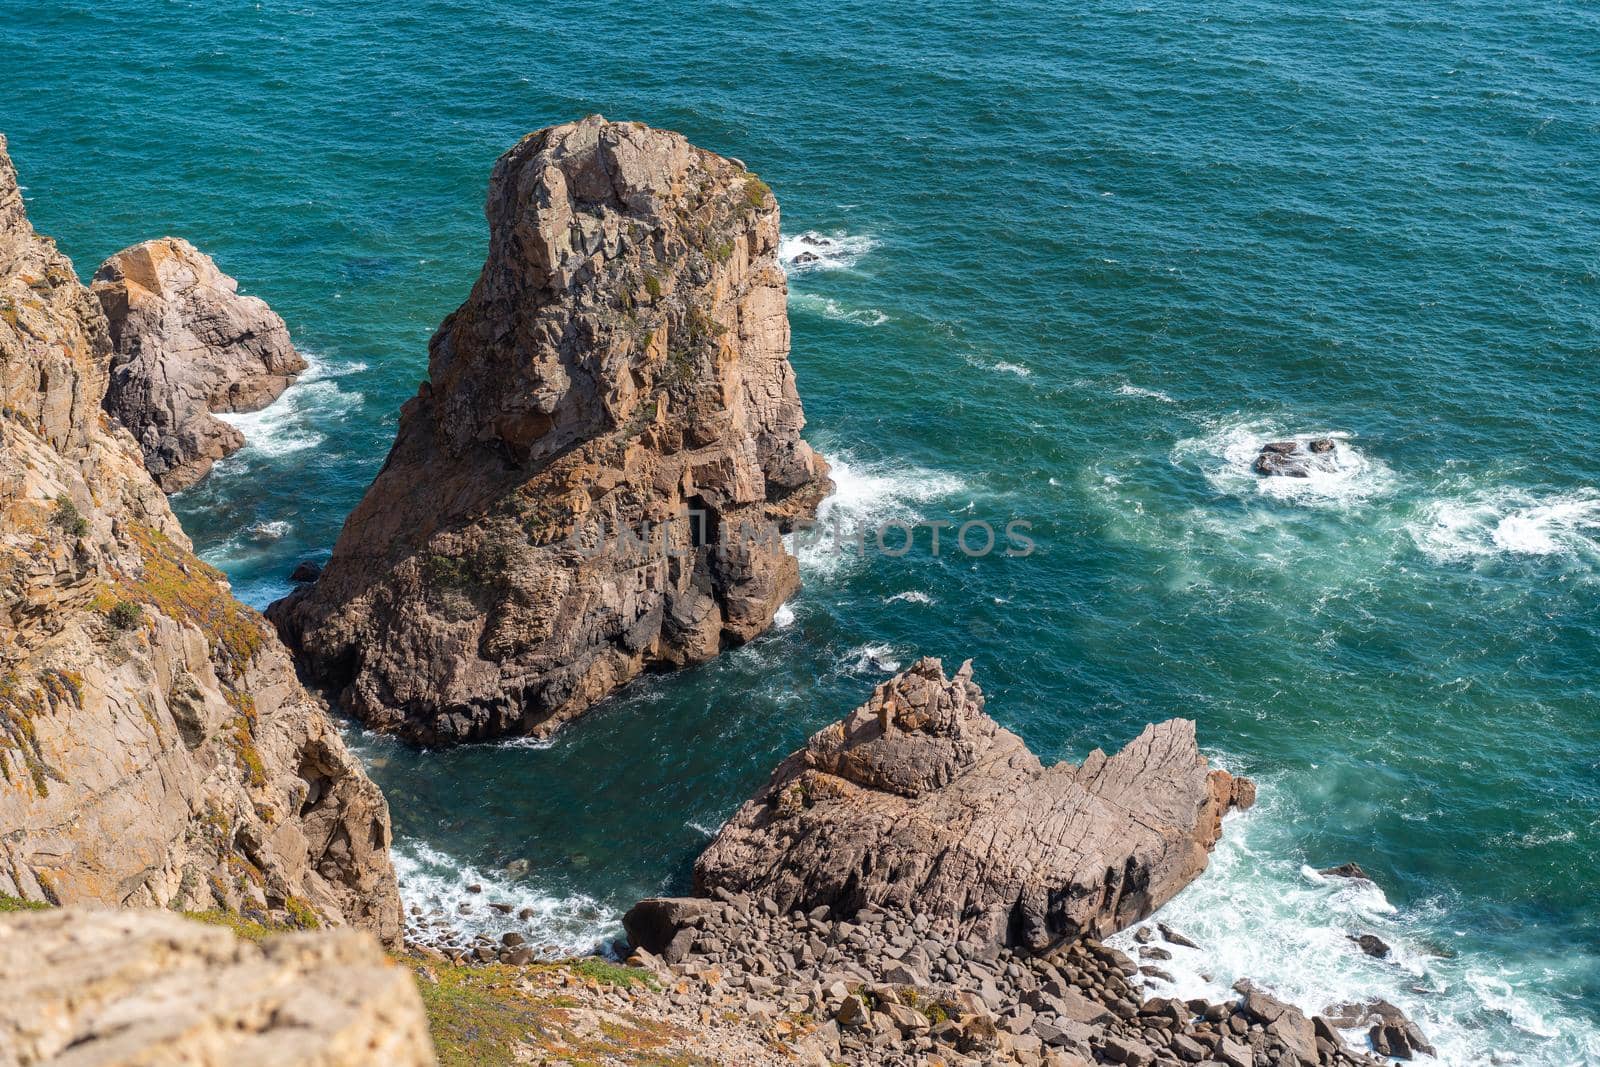 Atlantic ocean view with cliff. View of Atlantic Coast at Portugal, Cabo da Roca. Summer day by andreonegin